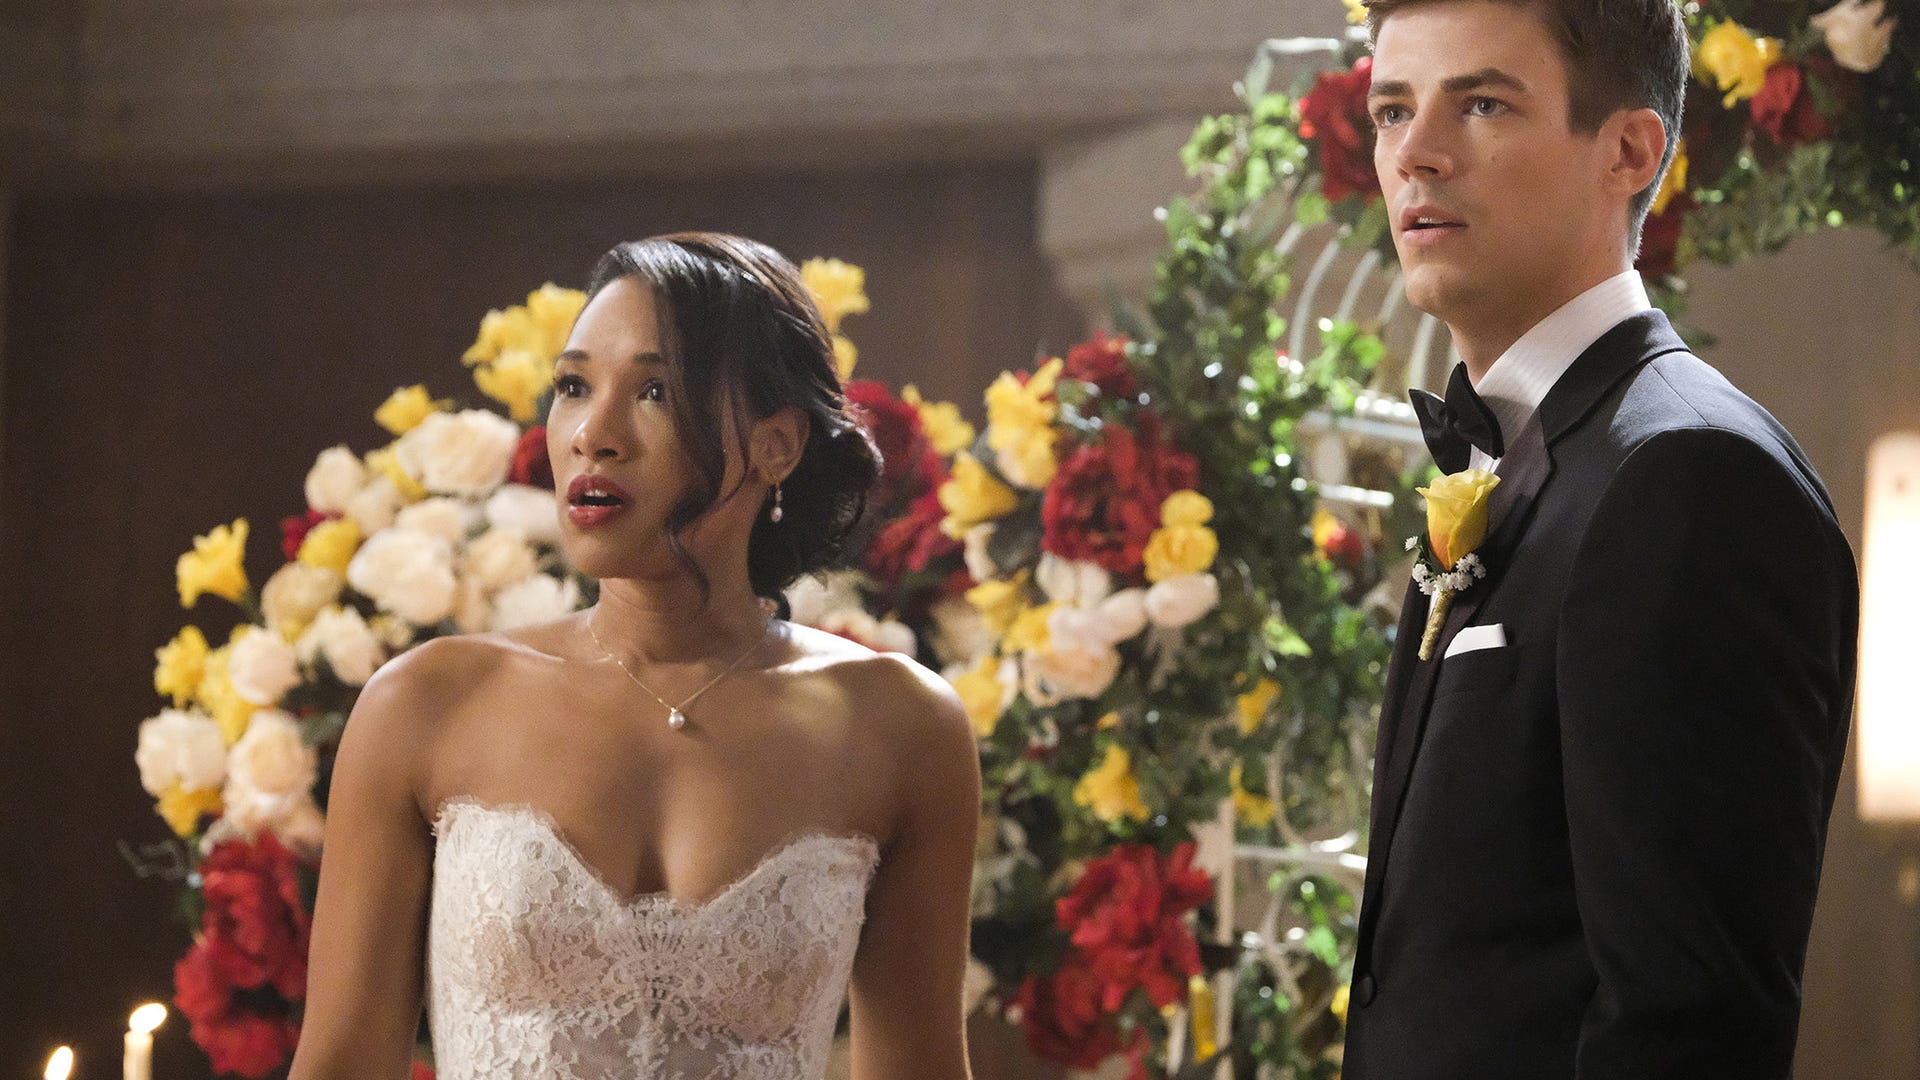 Grant Gustin and Candice Patton, Supergirl